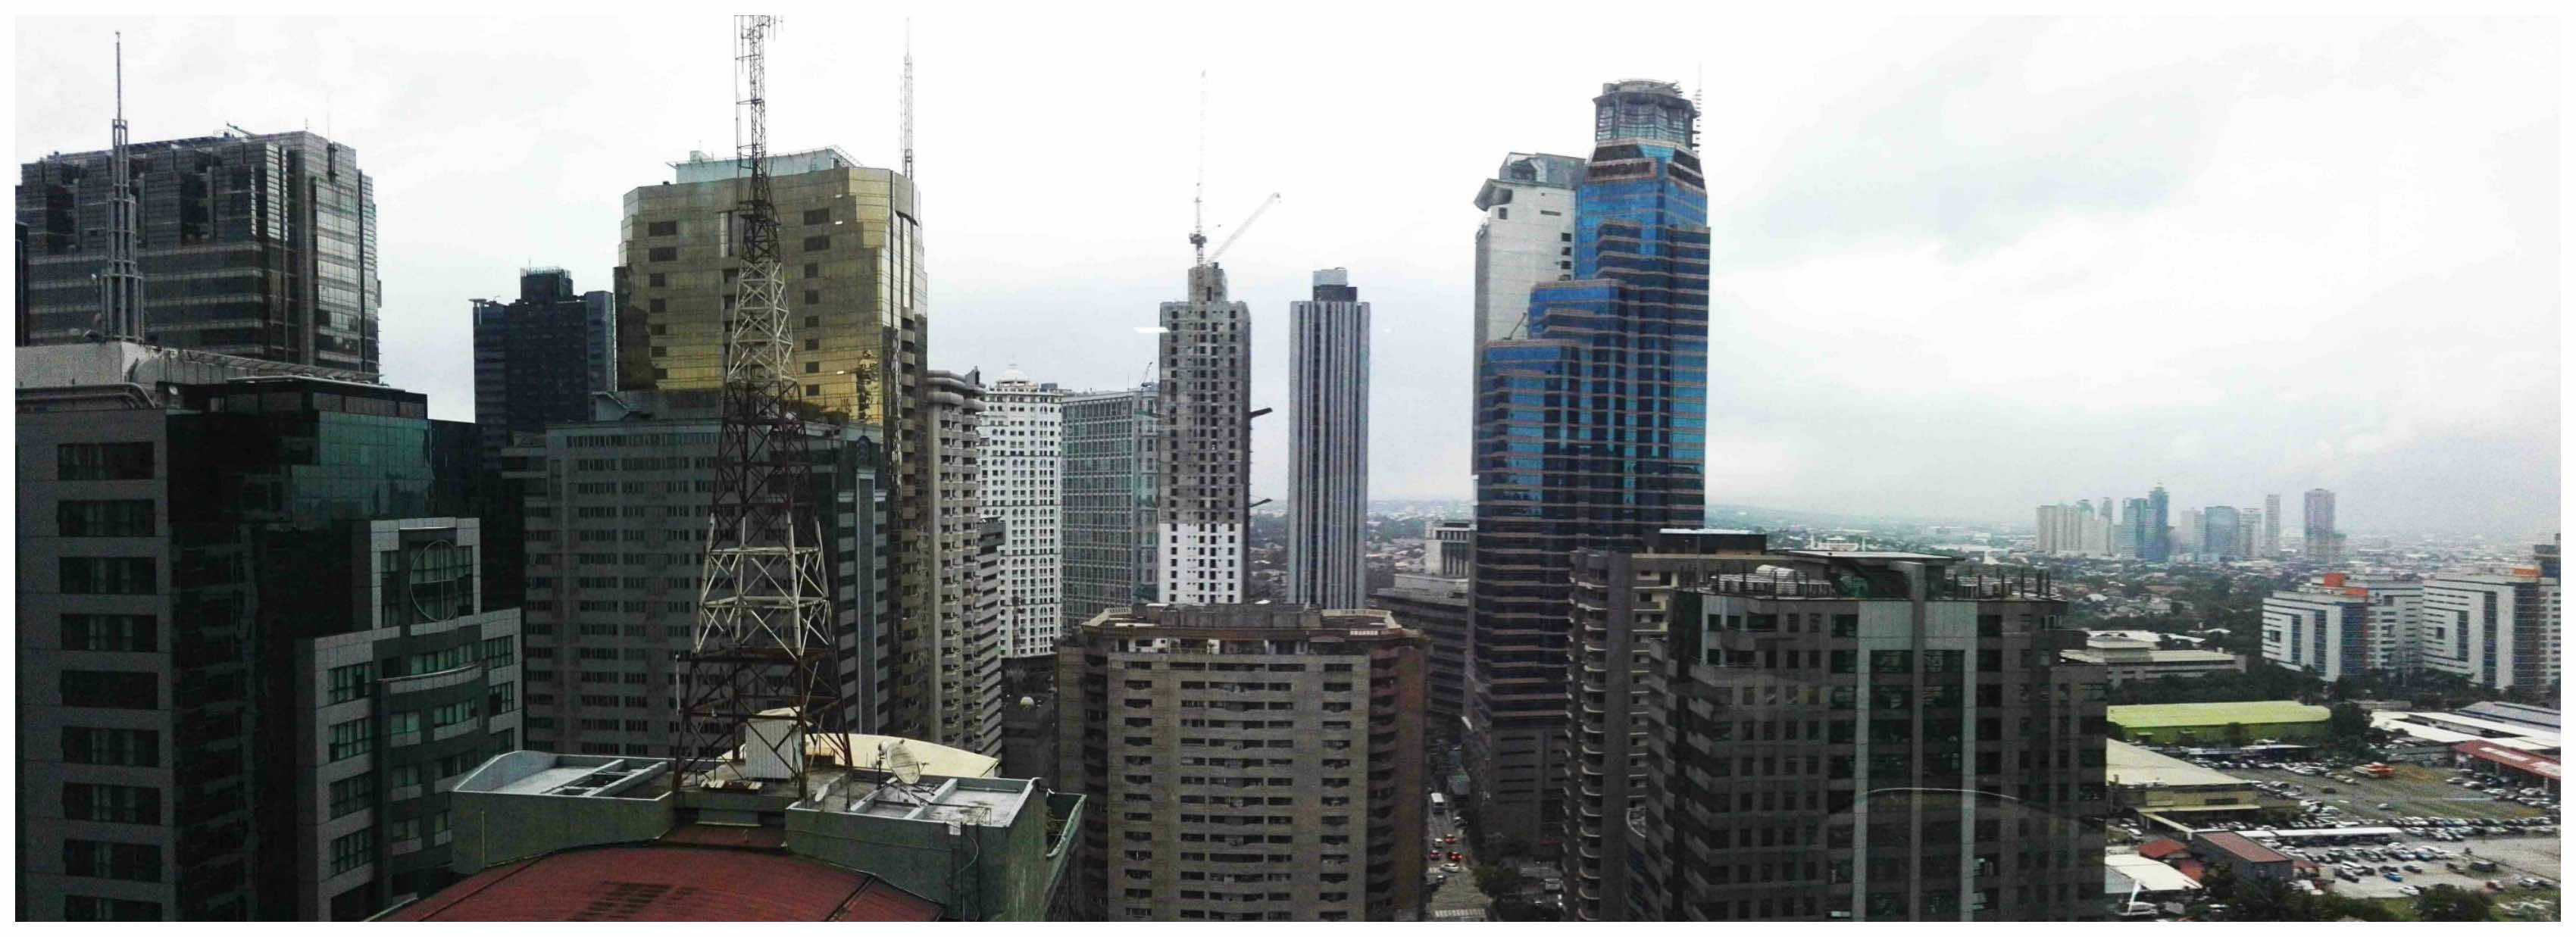 HIGH RISE. Part of the Ortigas skyline taken using Panorama mode with no filter. 